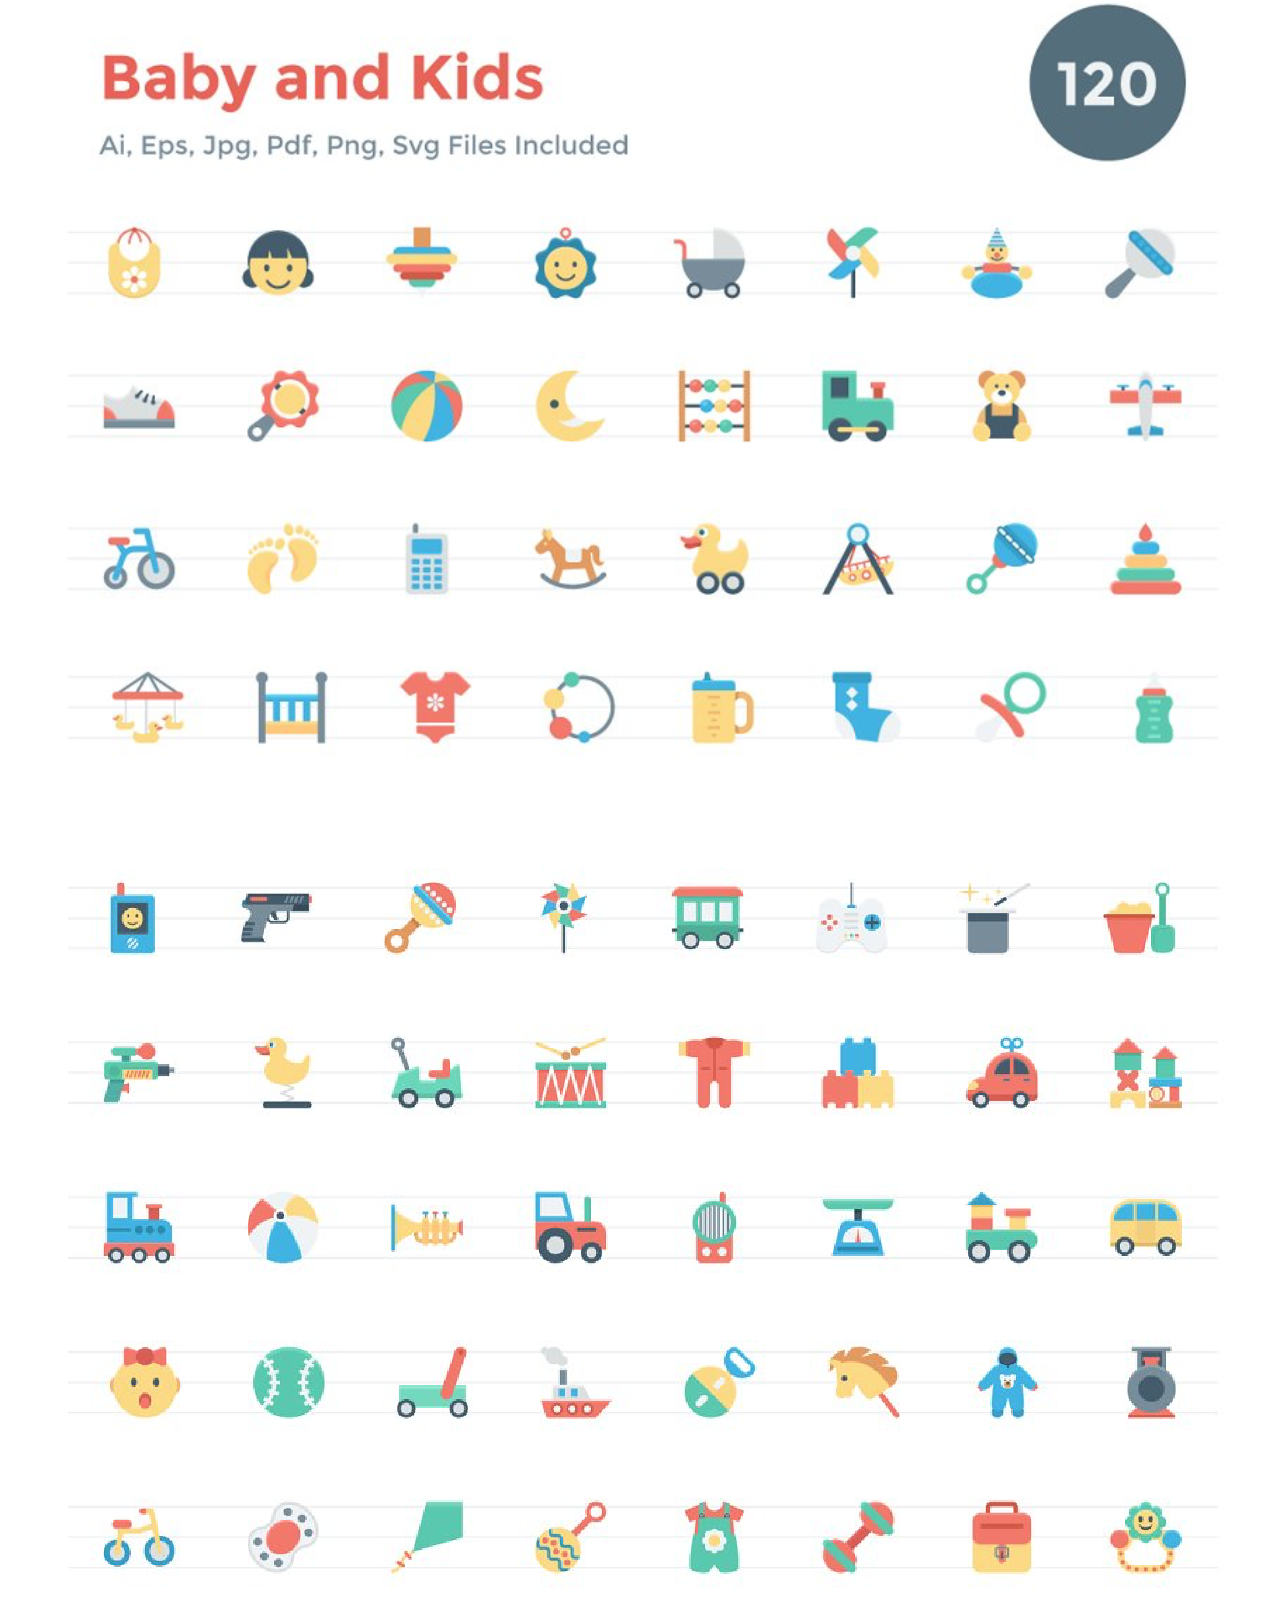 120 flat baby and kids icons pinterest image.